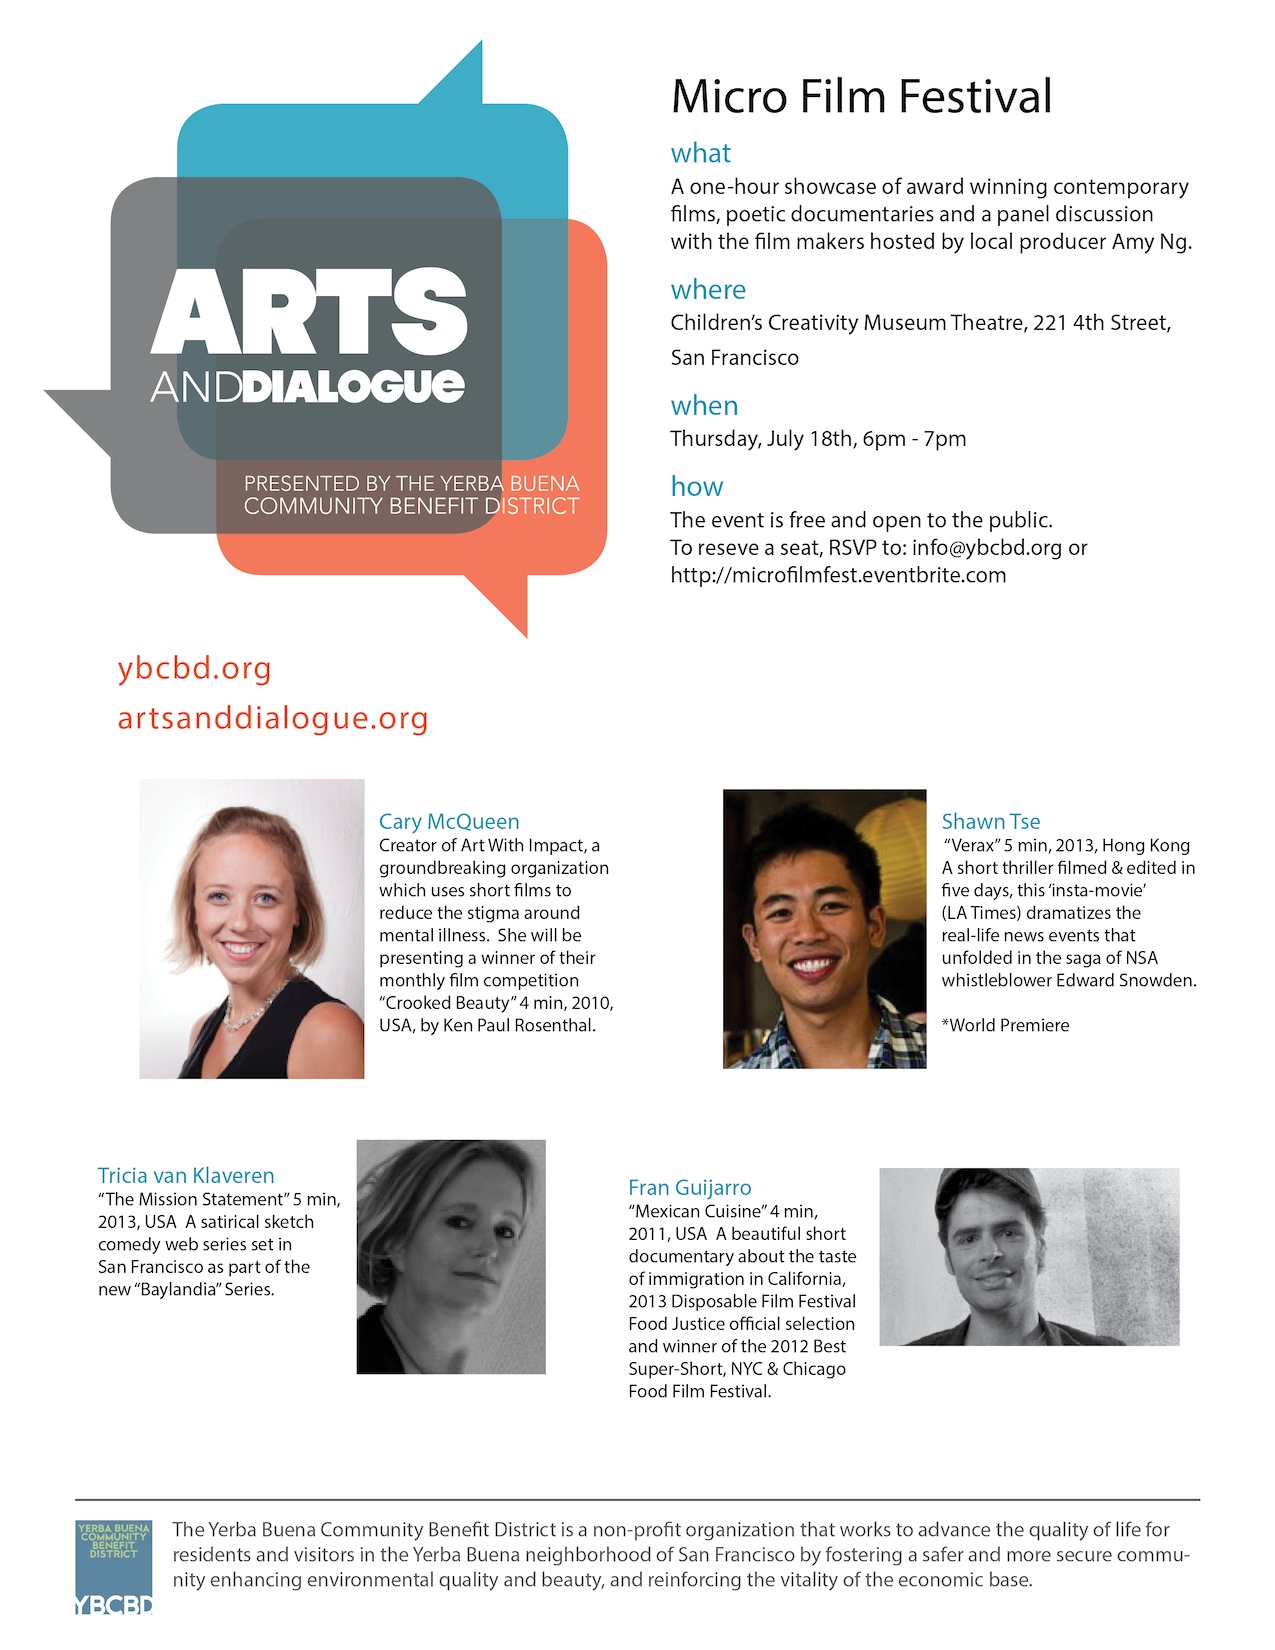 Micro Film Festival July Arts in Dialogue Poster